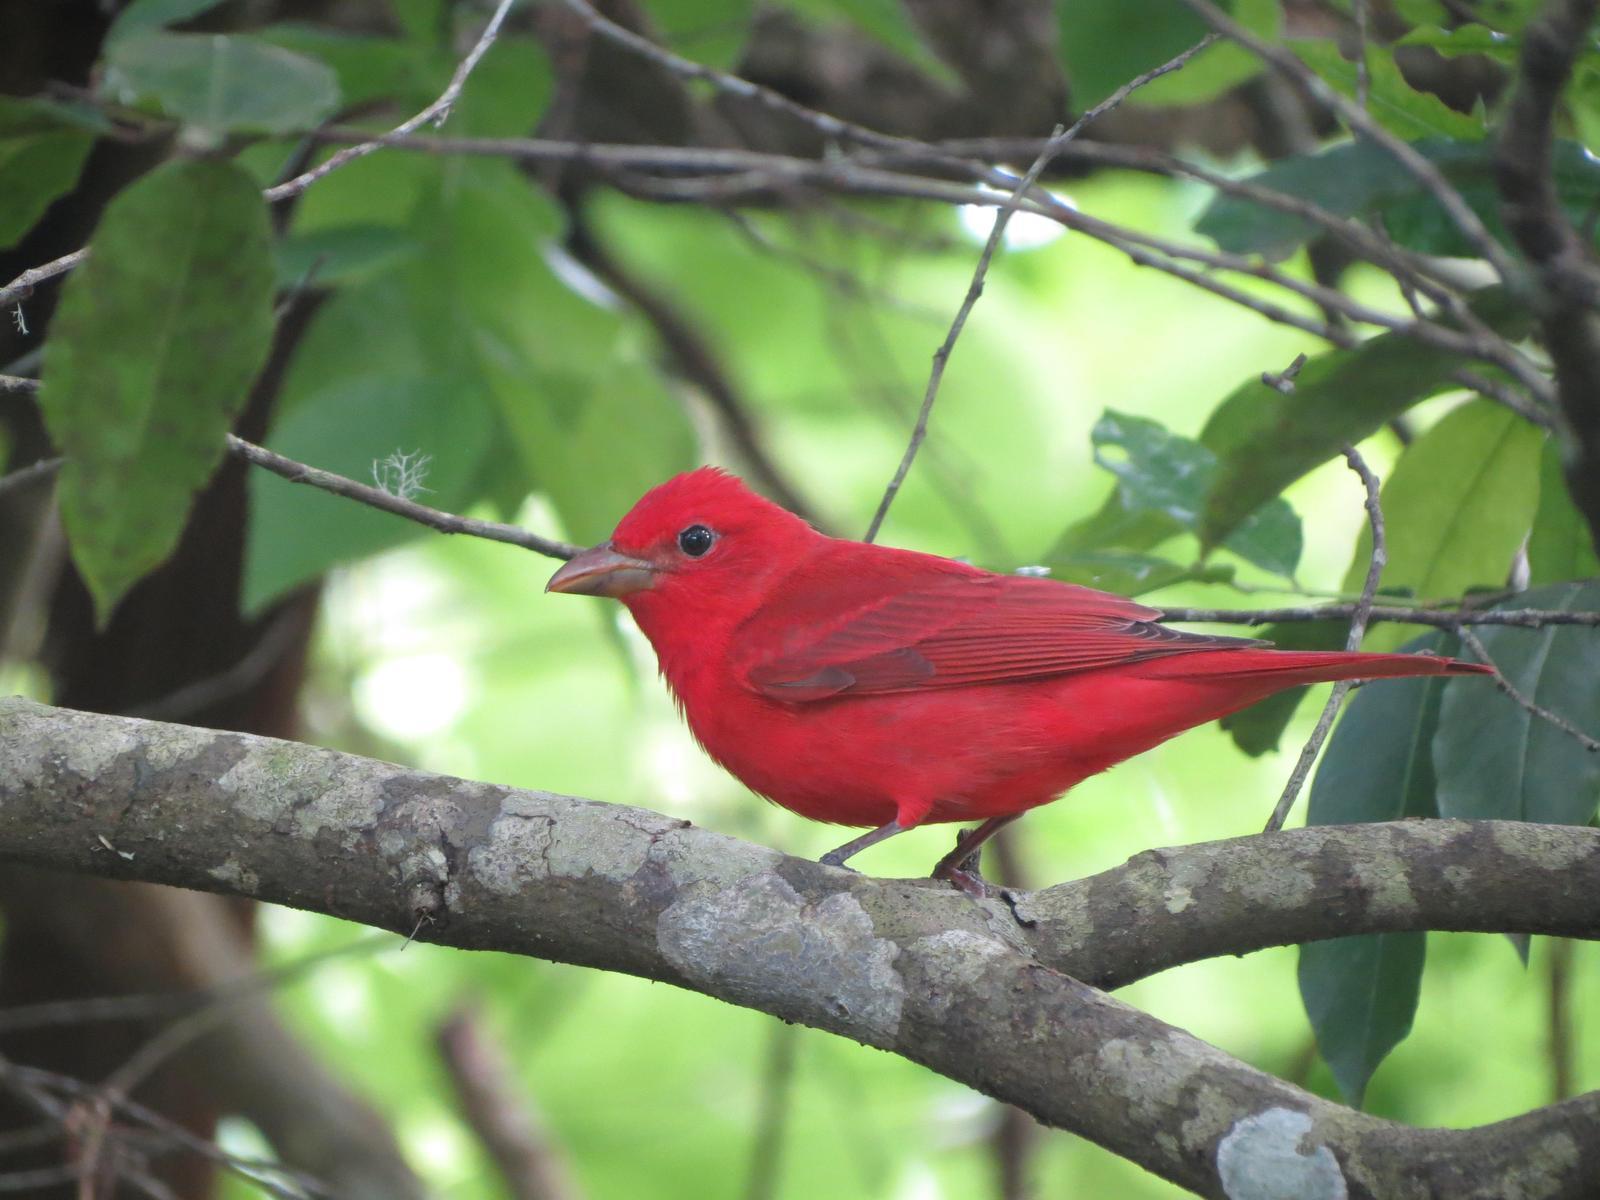 Summer Tanager Photo by Nolan Keyes